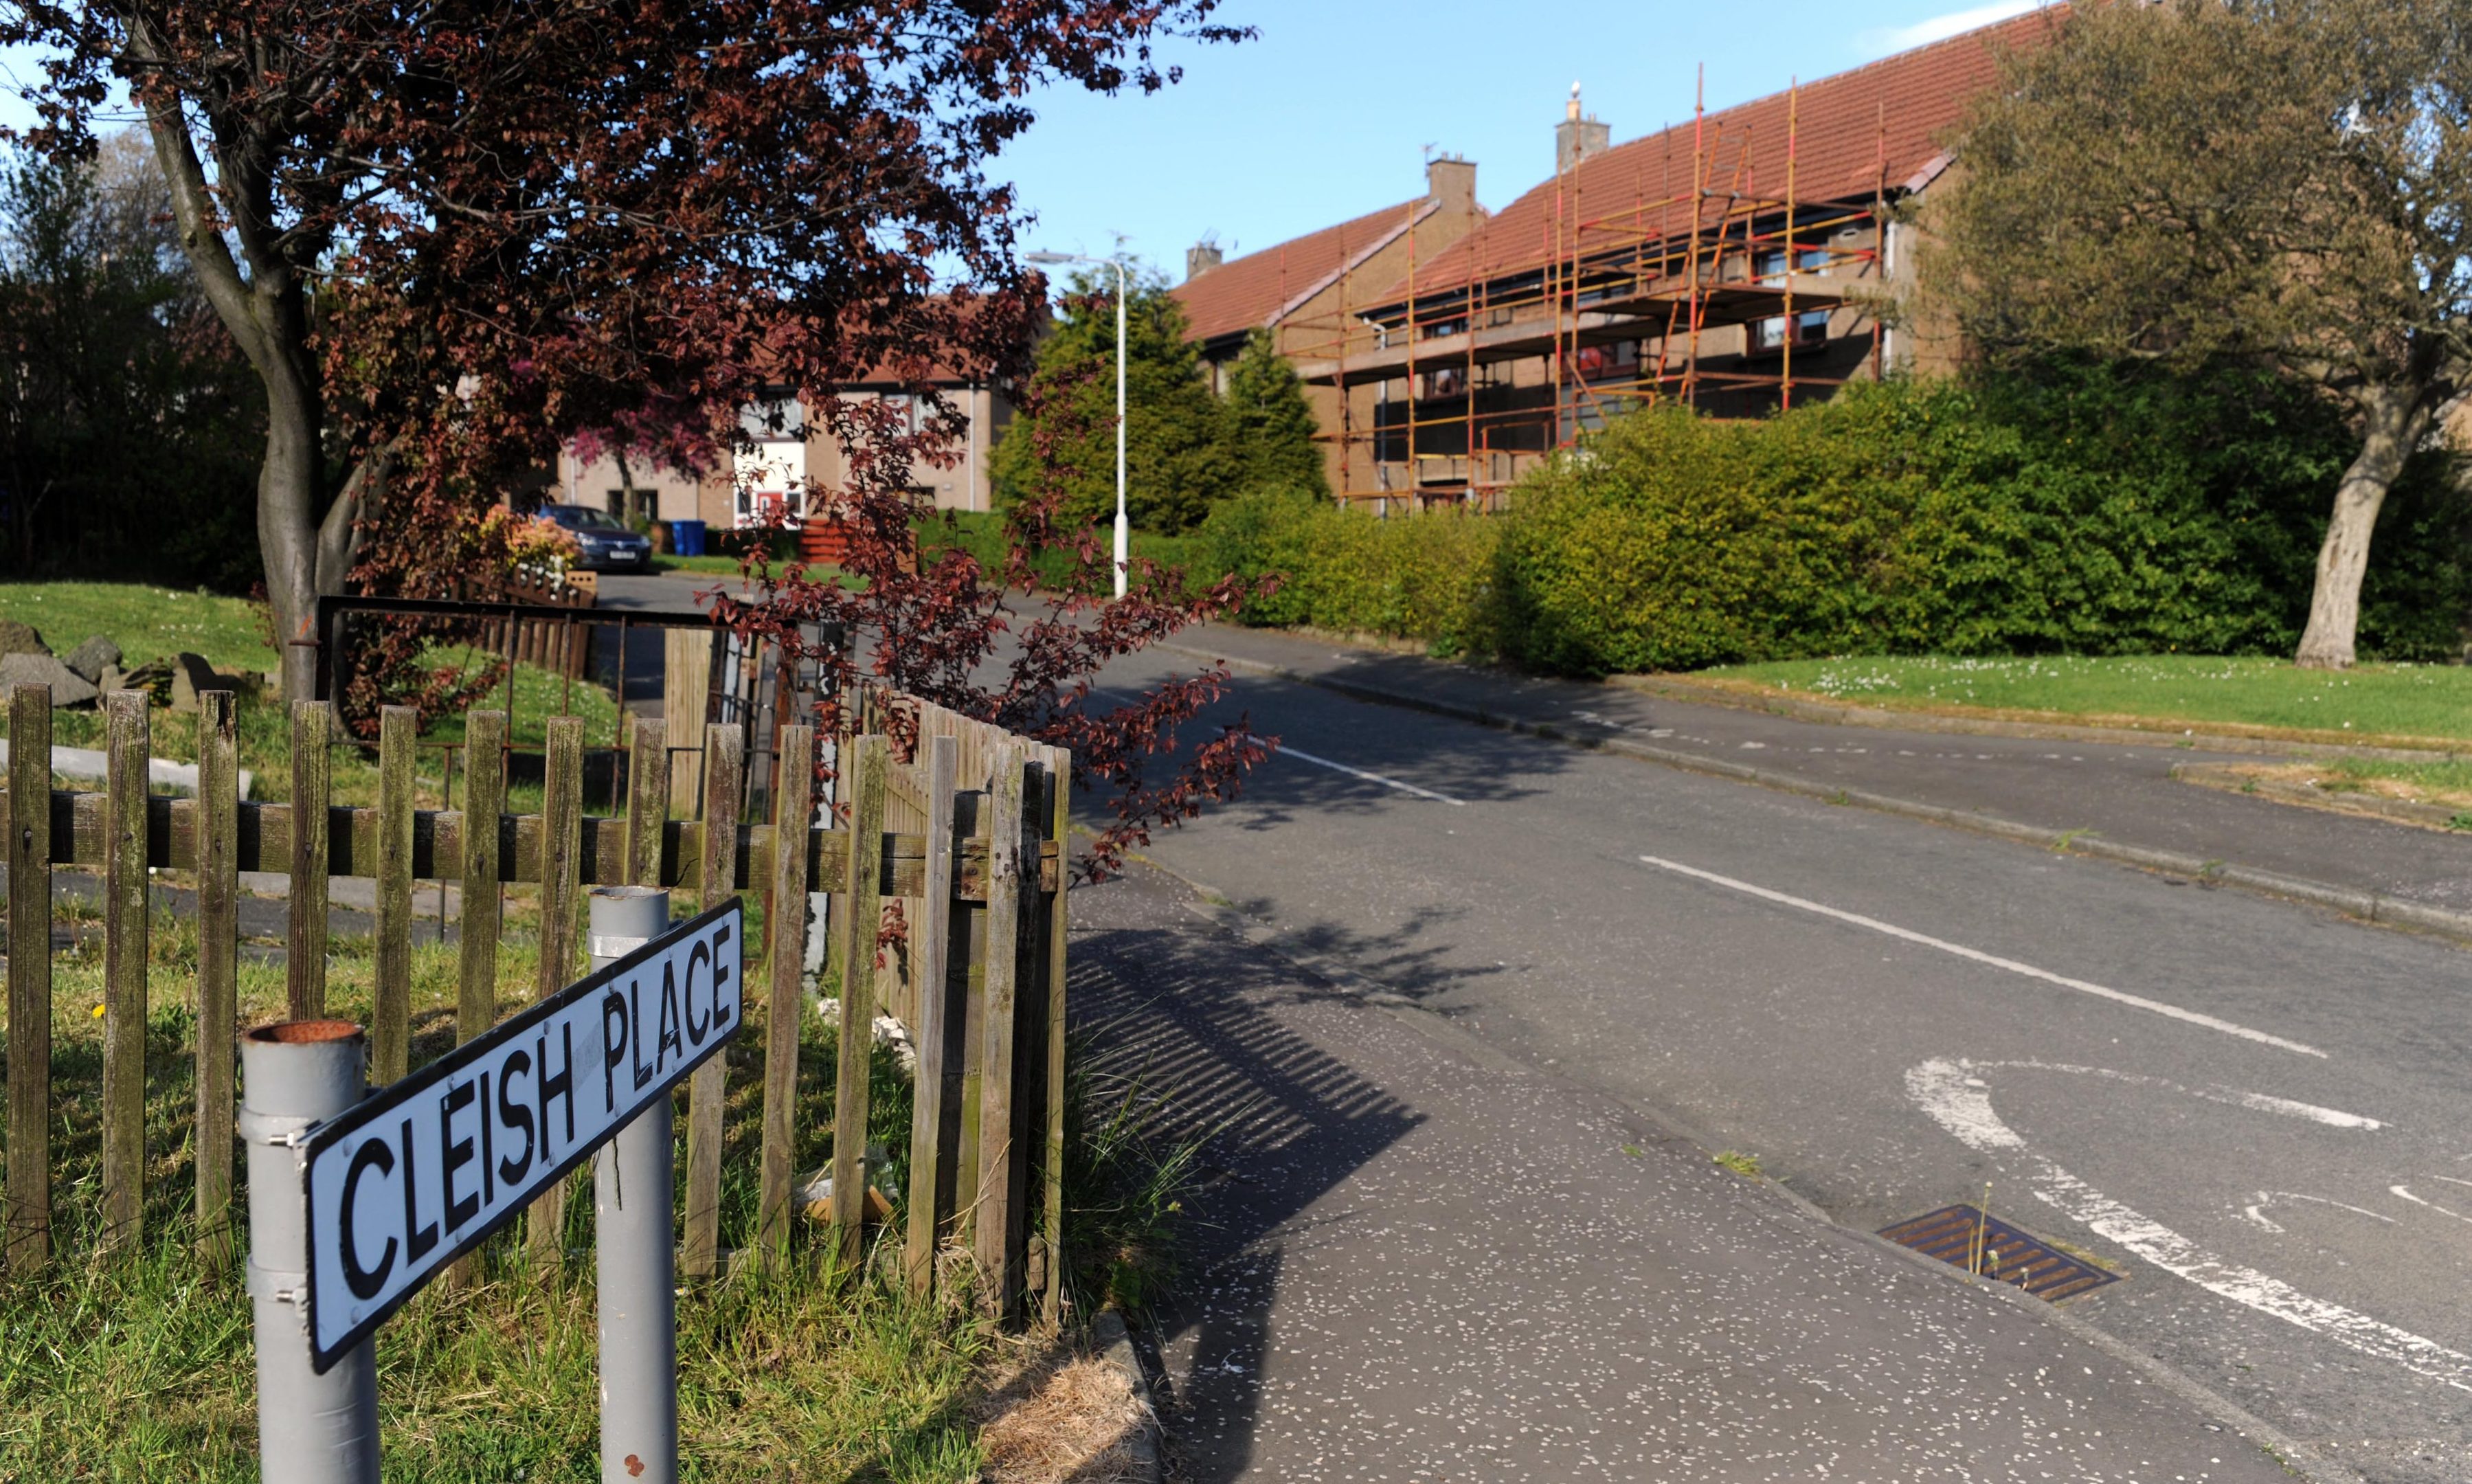 Cleish Place showing the block where the body was found.